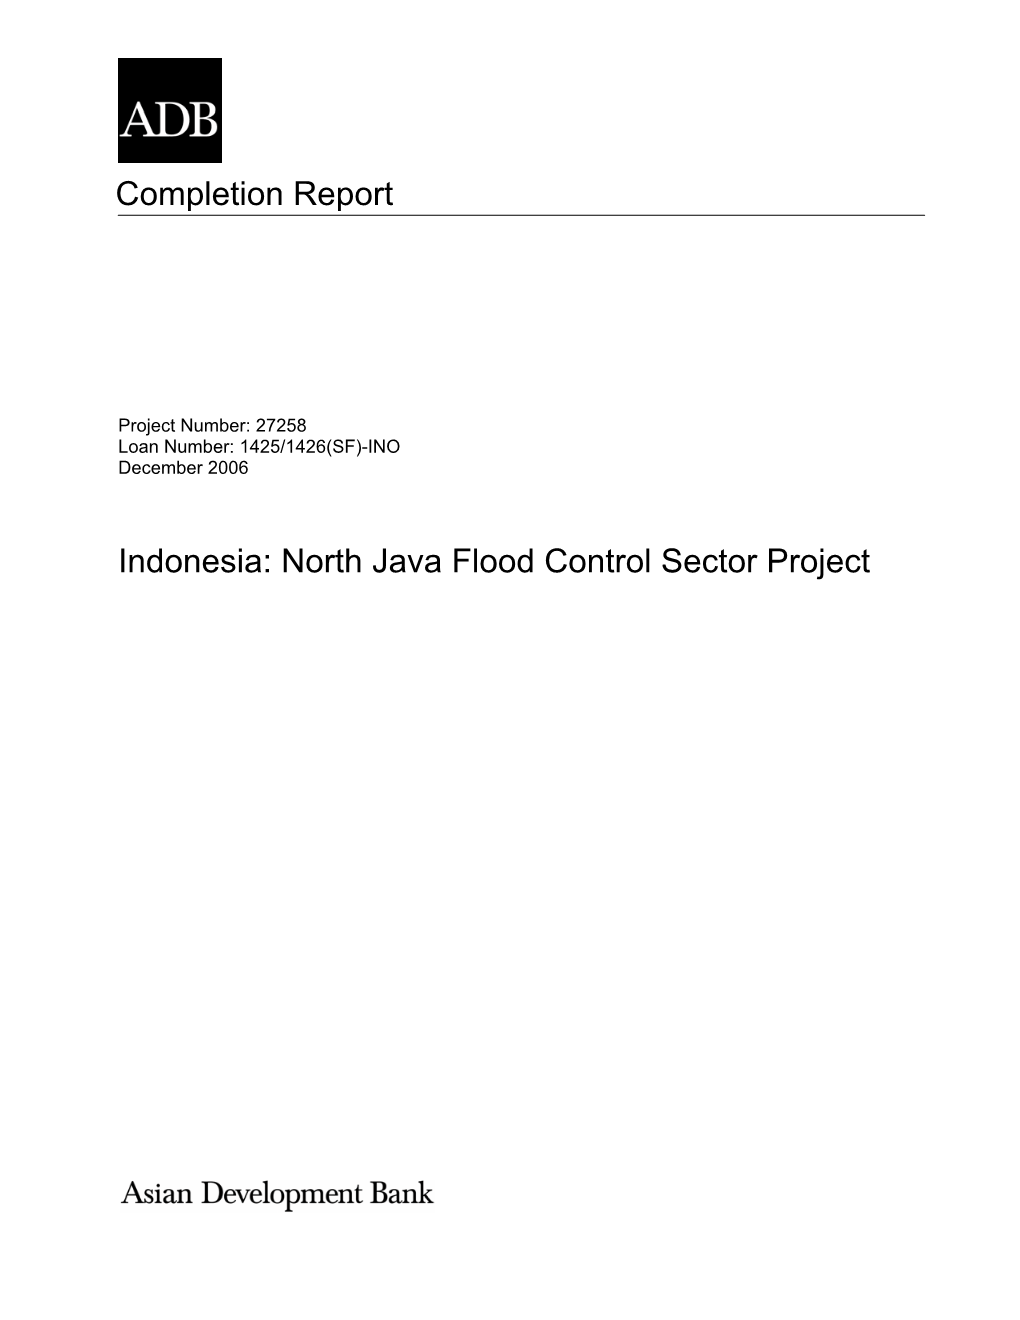 North Java Flood Control Sector Project CURRENCY EQUIVALENTS